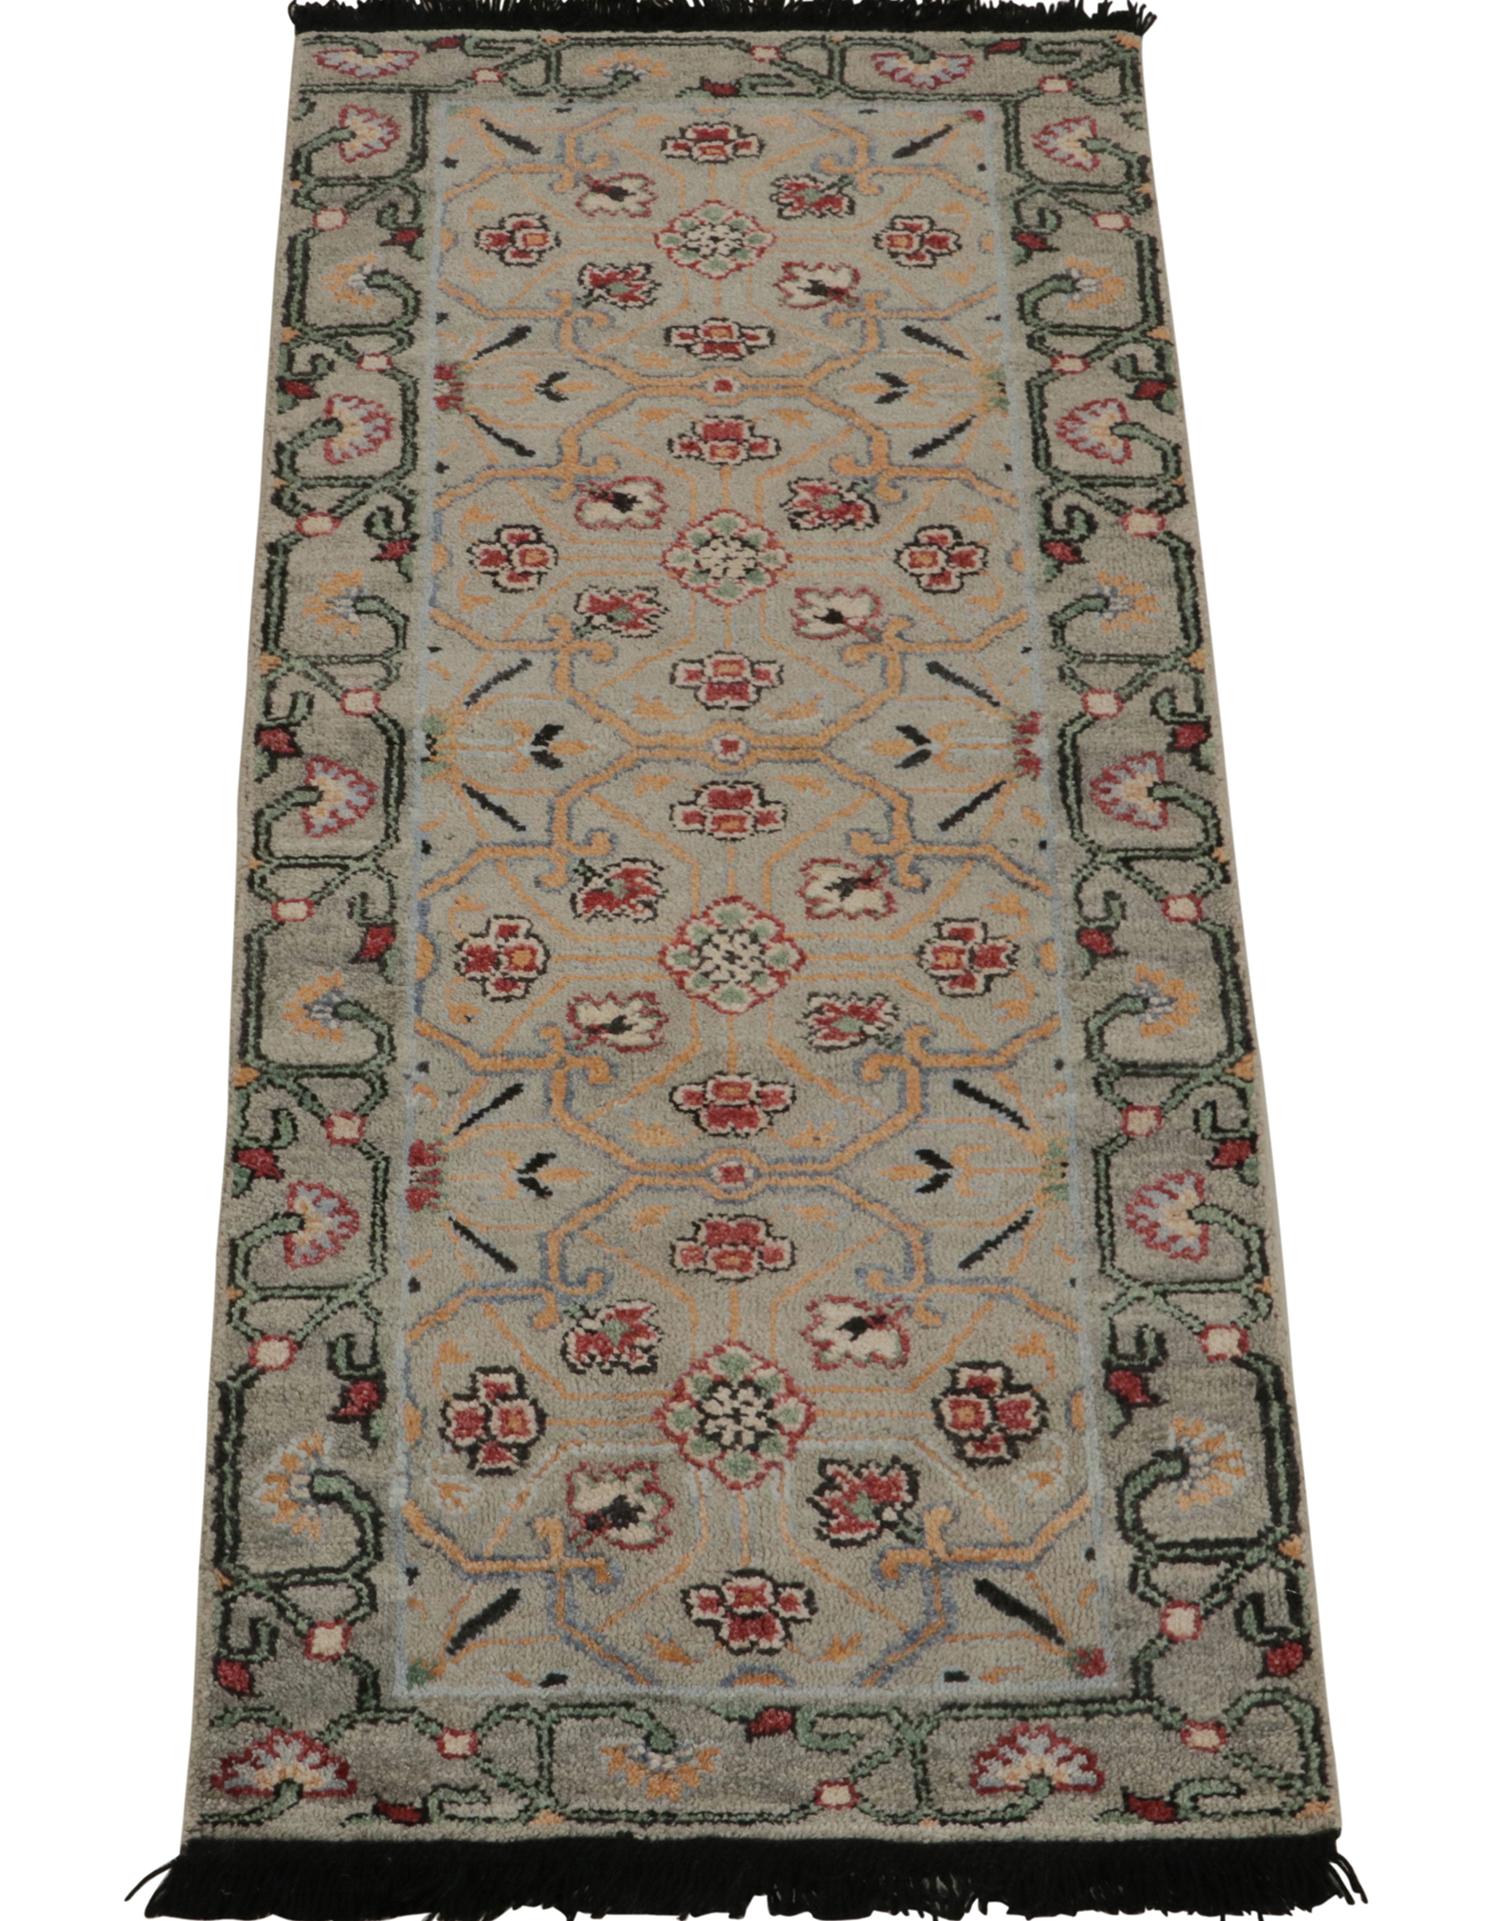 Indian Rug & Kilim’s Classic Style Runner in Blue, Green and Red Floral Patterns For Sale